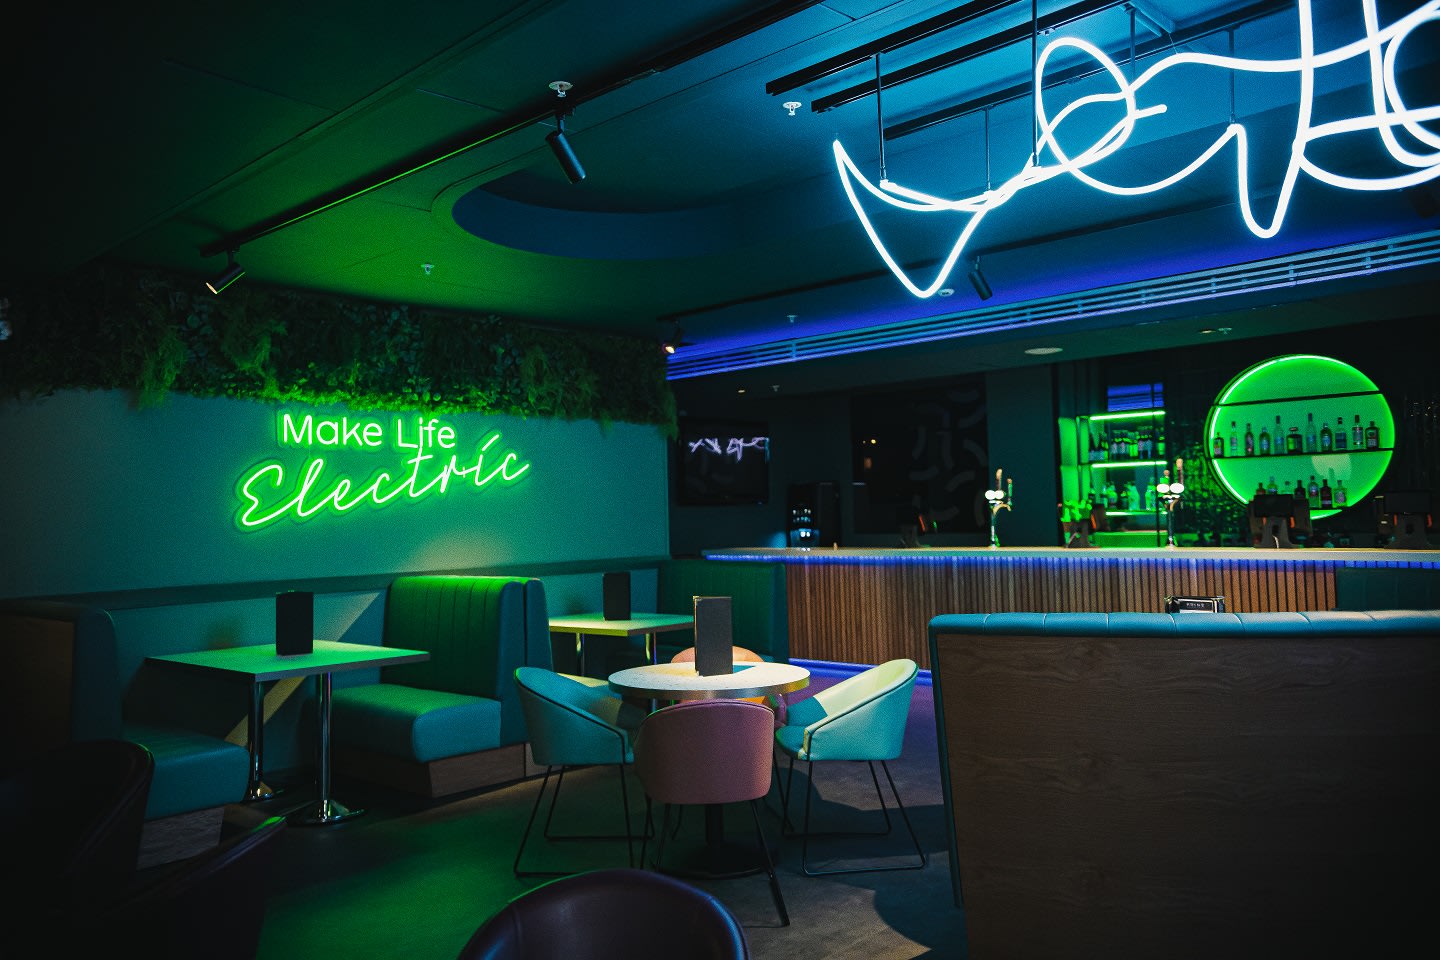 Electric Lounge at AO Arena, Manchester